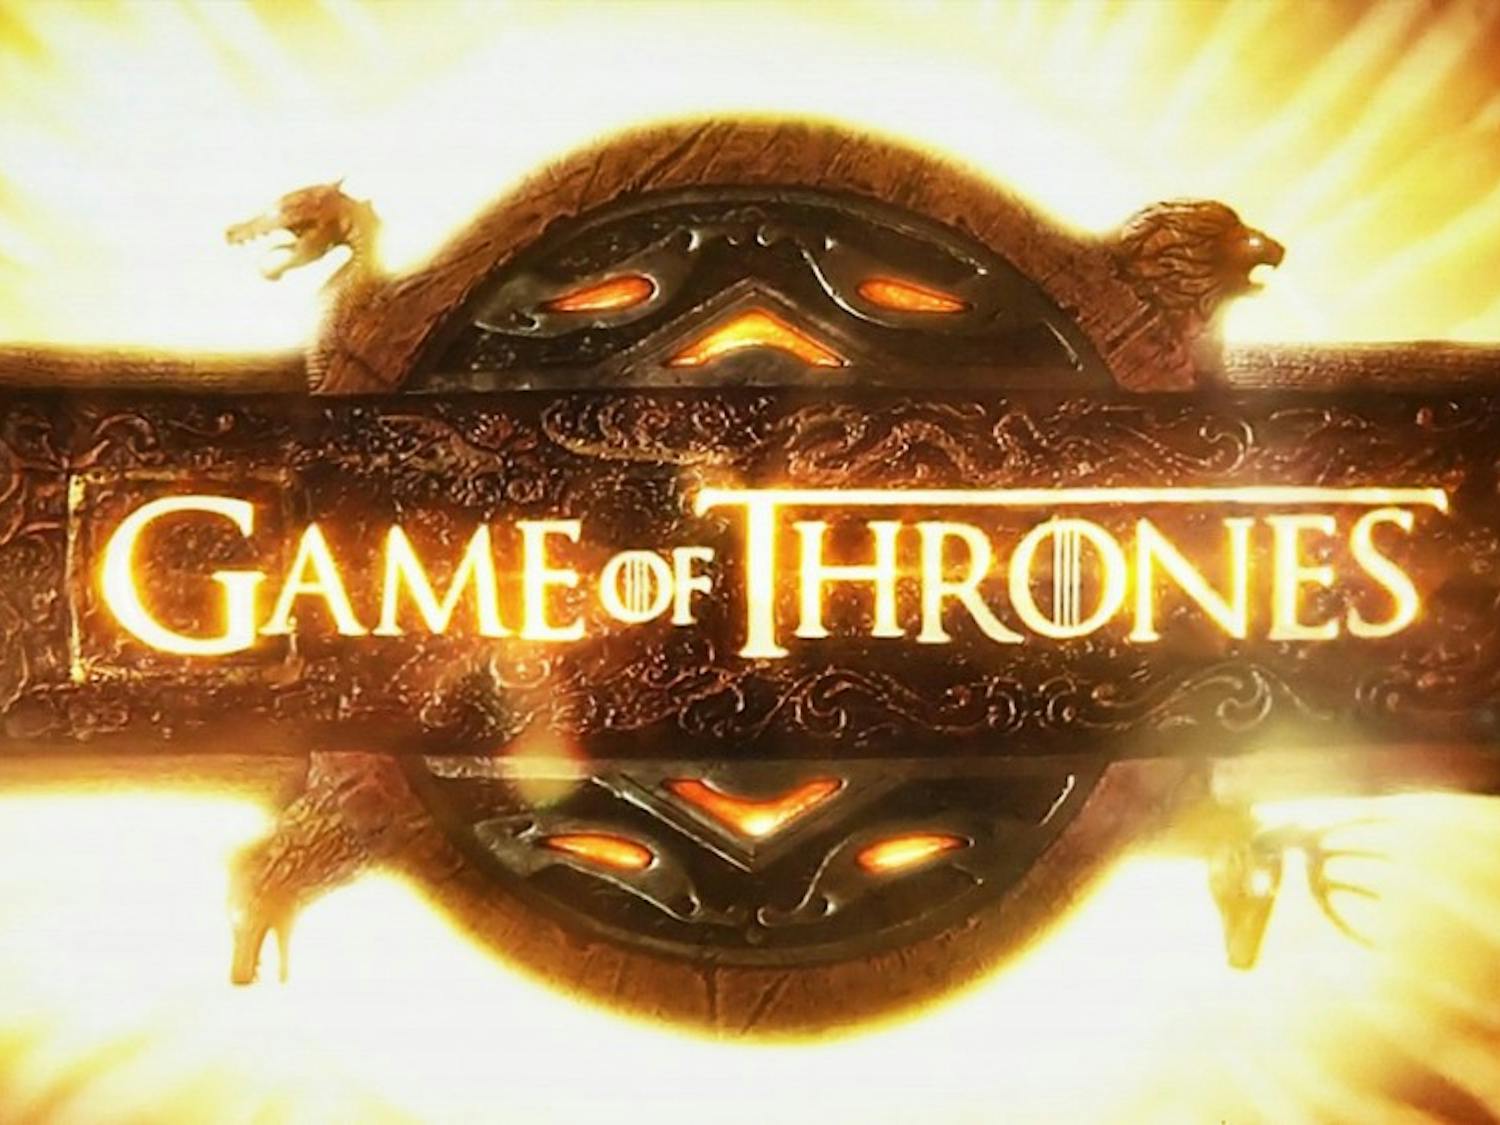 Game of Thrones titlecard